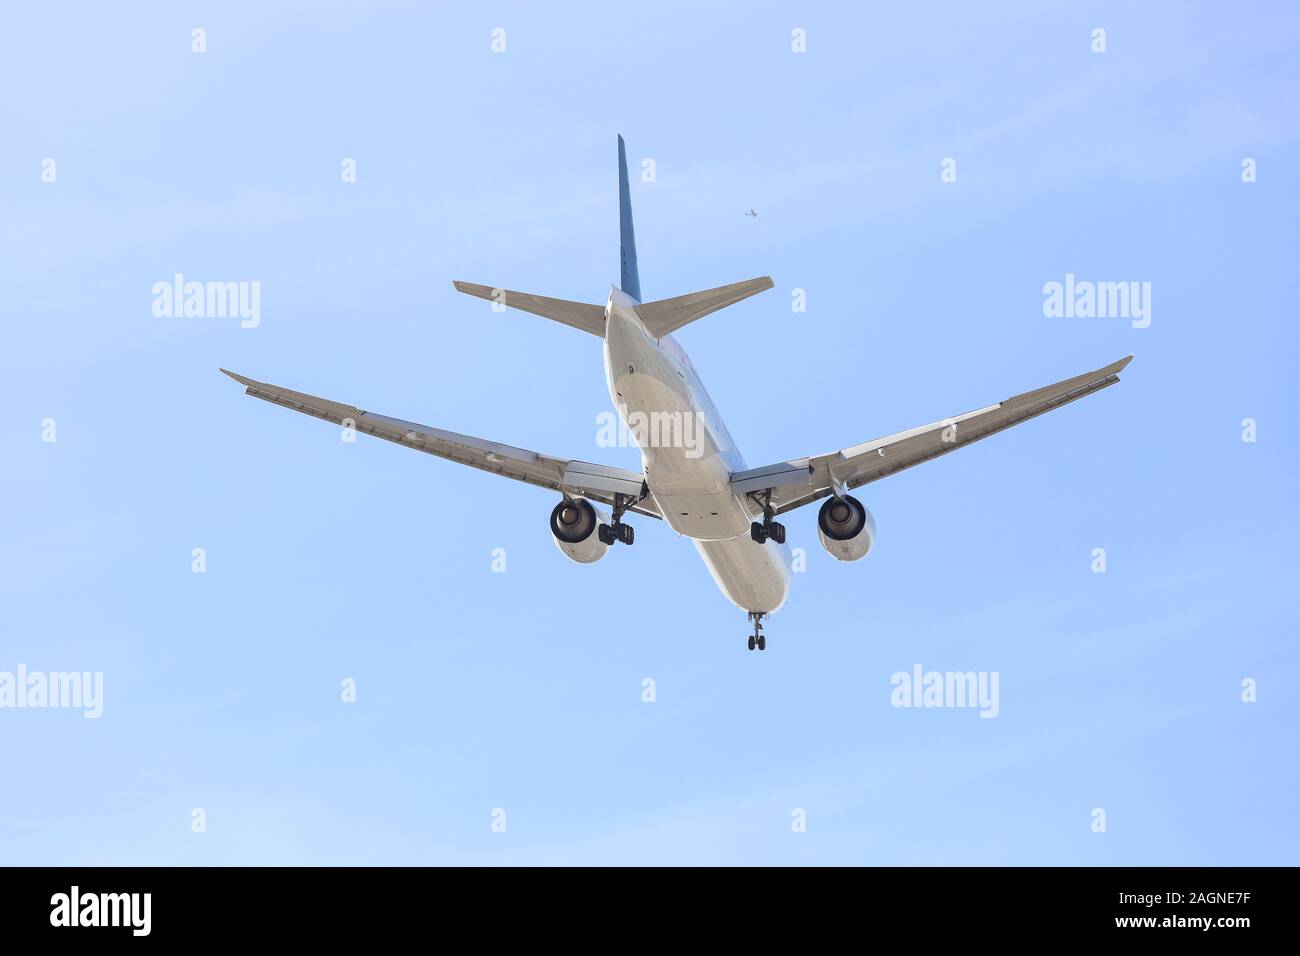 A commercial airliner preparing to land on Los Angeles airport Stock Photo